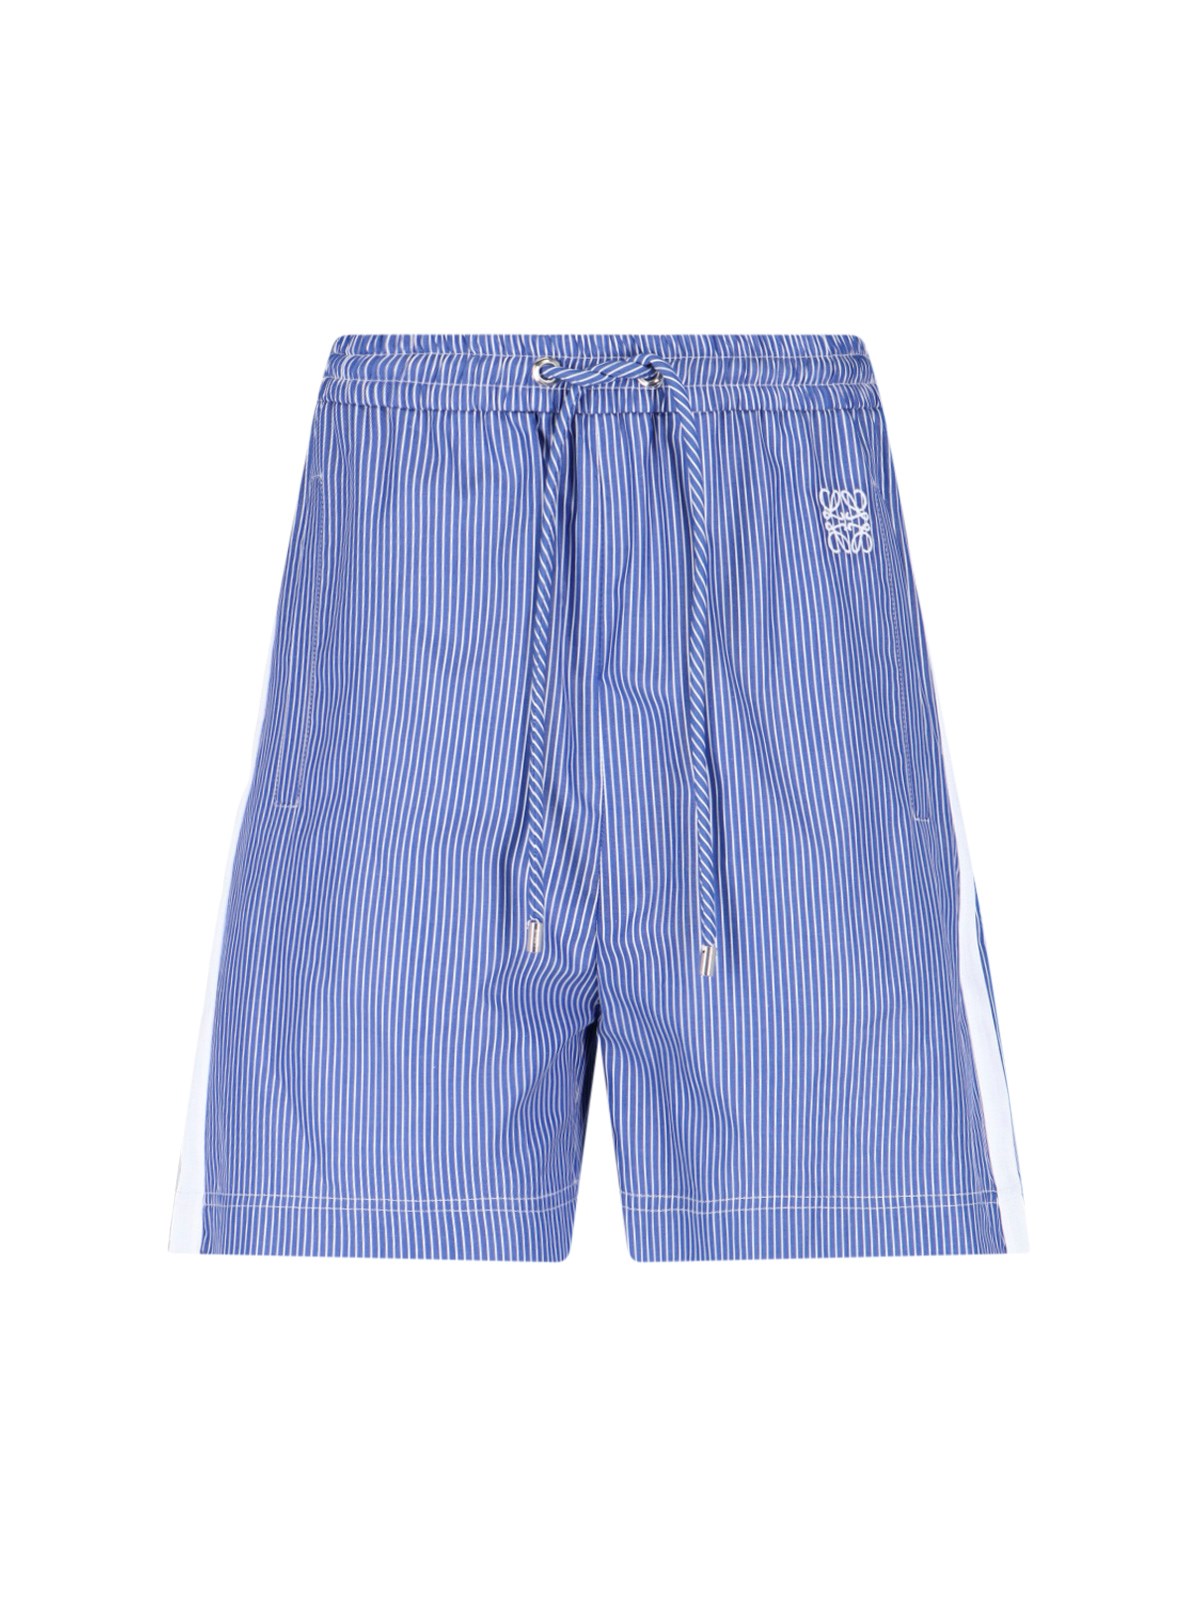 Loewe Embroidered Striped Cotton Shorts In Blue